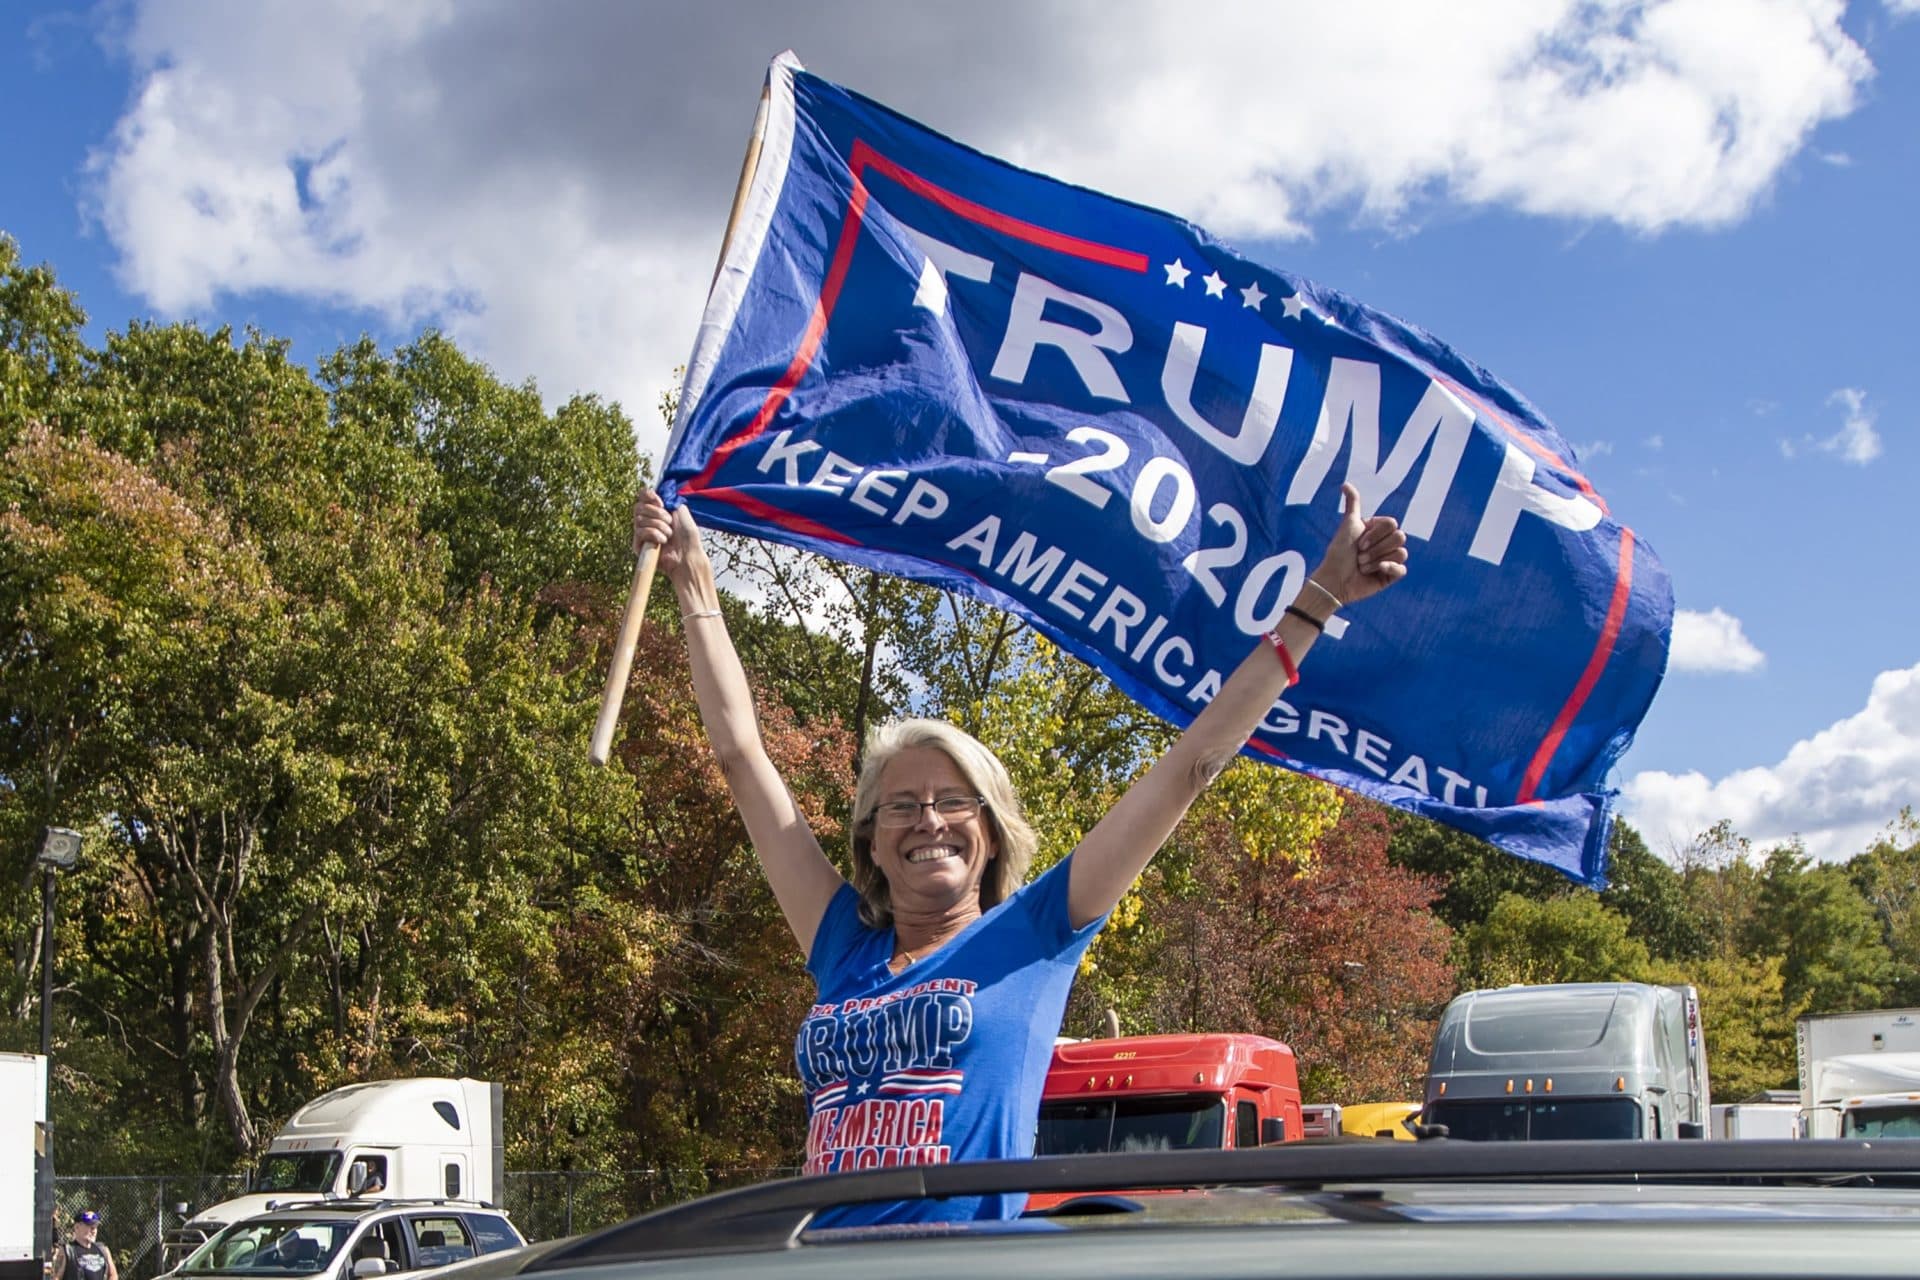 A supporter holds a Trump campaign flag out the sunroof of a car as they leave the Lexington Service Center on Route 95 enroute to the Trump Train rally Londonderry, NH. (Jesse Costa/WBUR)